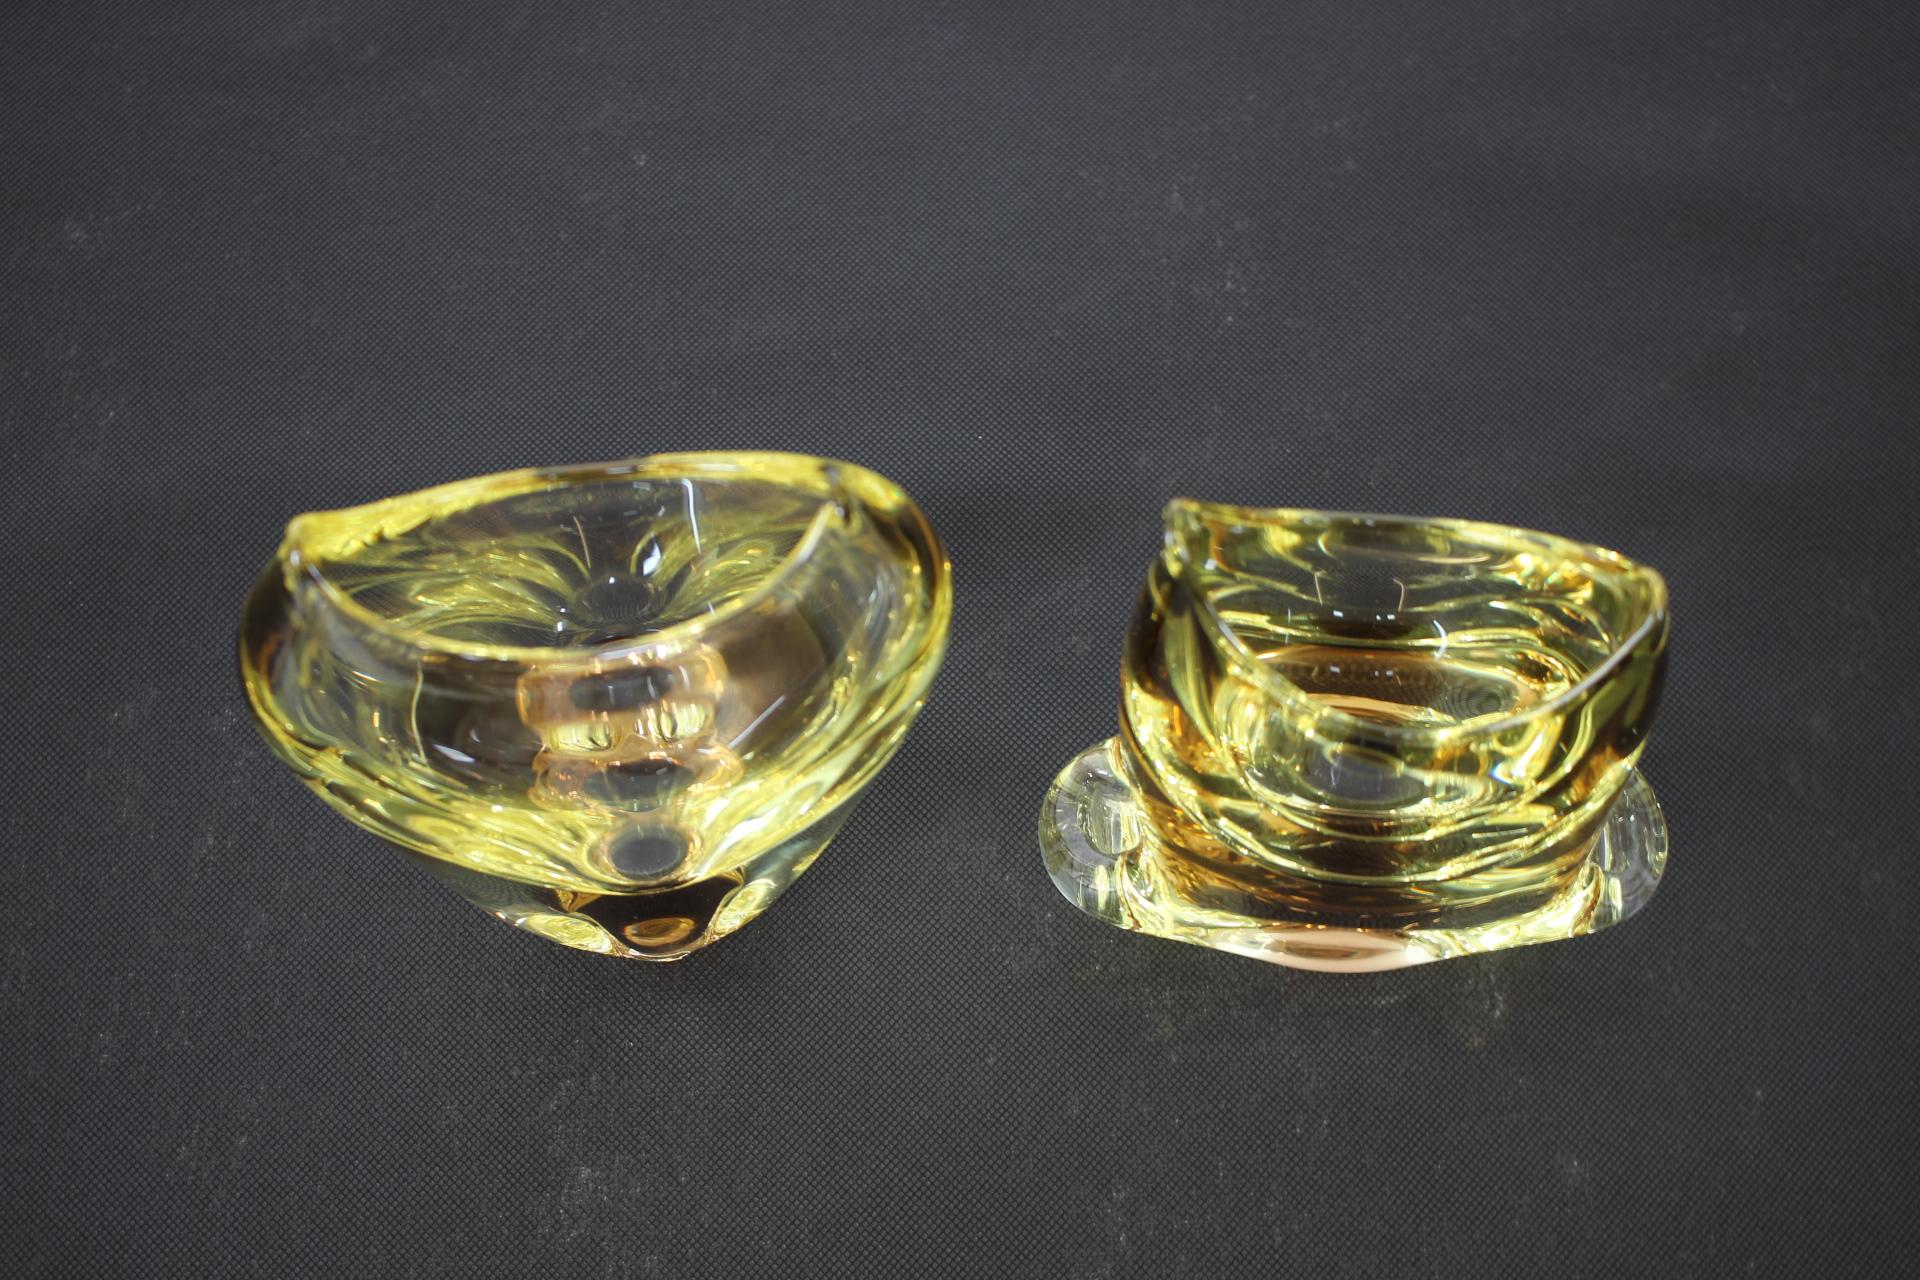 - Made in Czechoslovakia
- Made of glass
- Dimensions small vase are H 17 x W 14 x D 6
- Re-polished
- Very good, original condition.